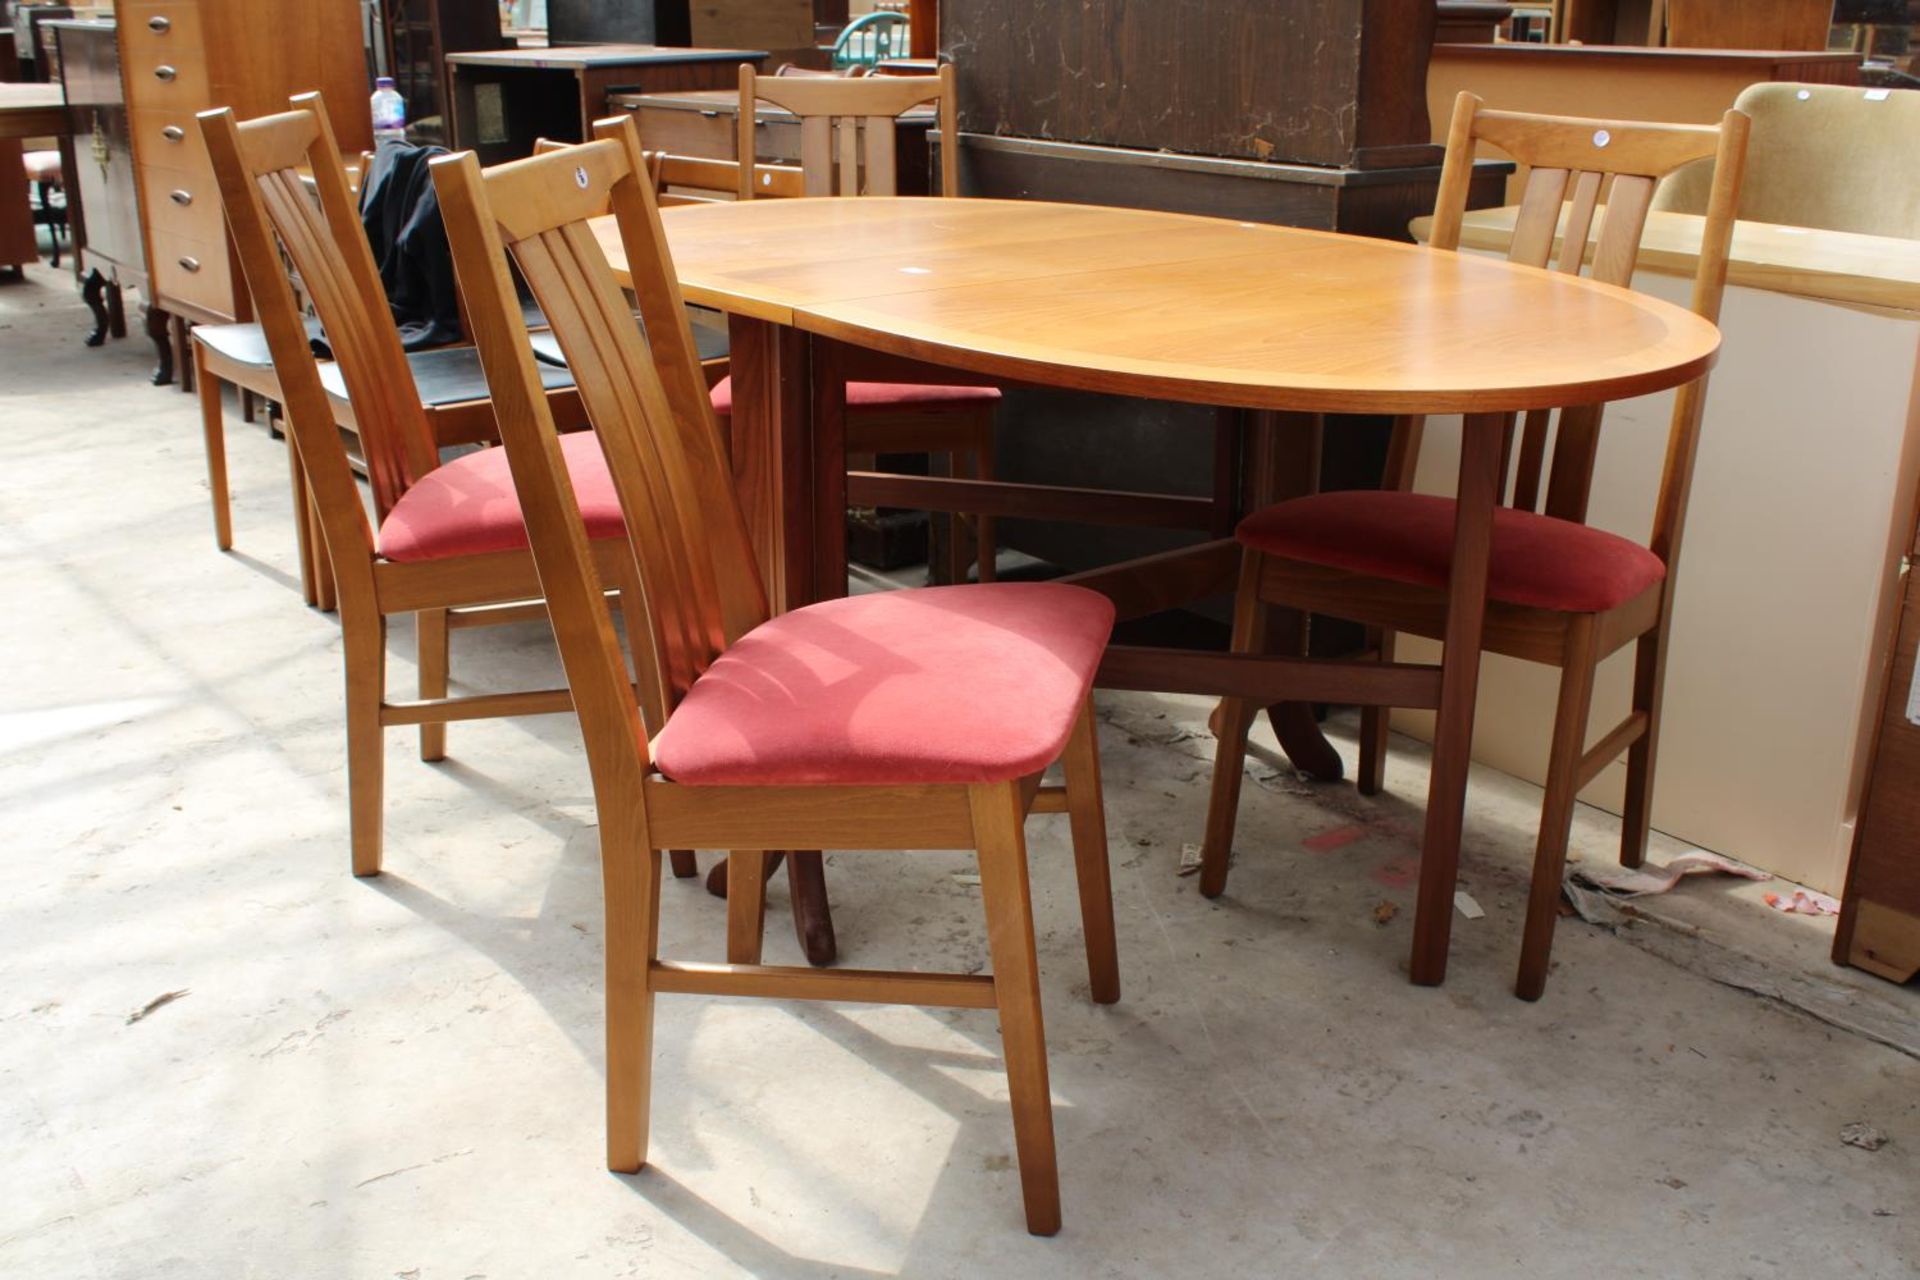 A RETRO TEAK GATE-LEG DINING TABLE AND 4 CHAIRS, 63" X 36" OPENED - Bild 2 aus 5